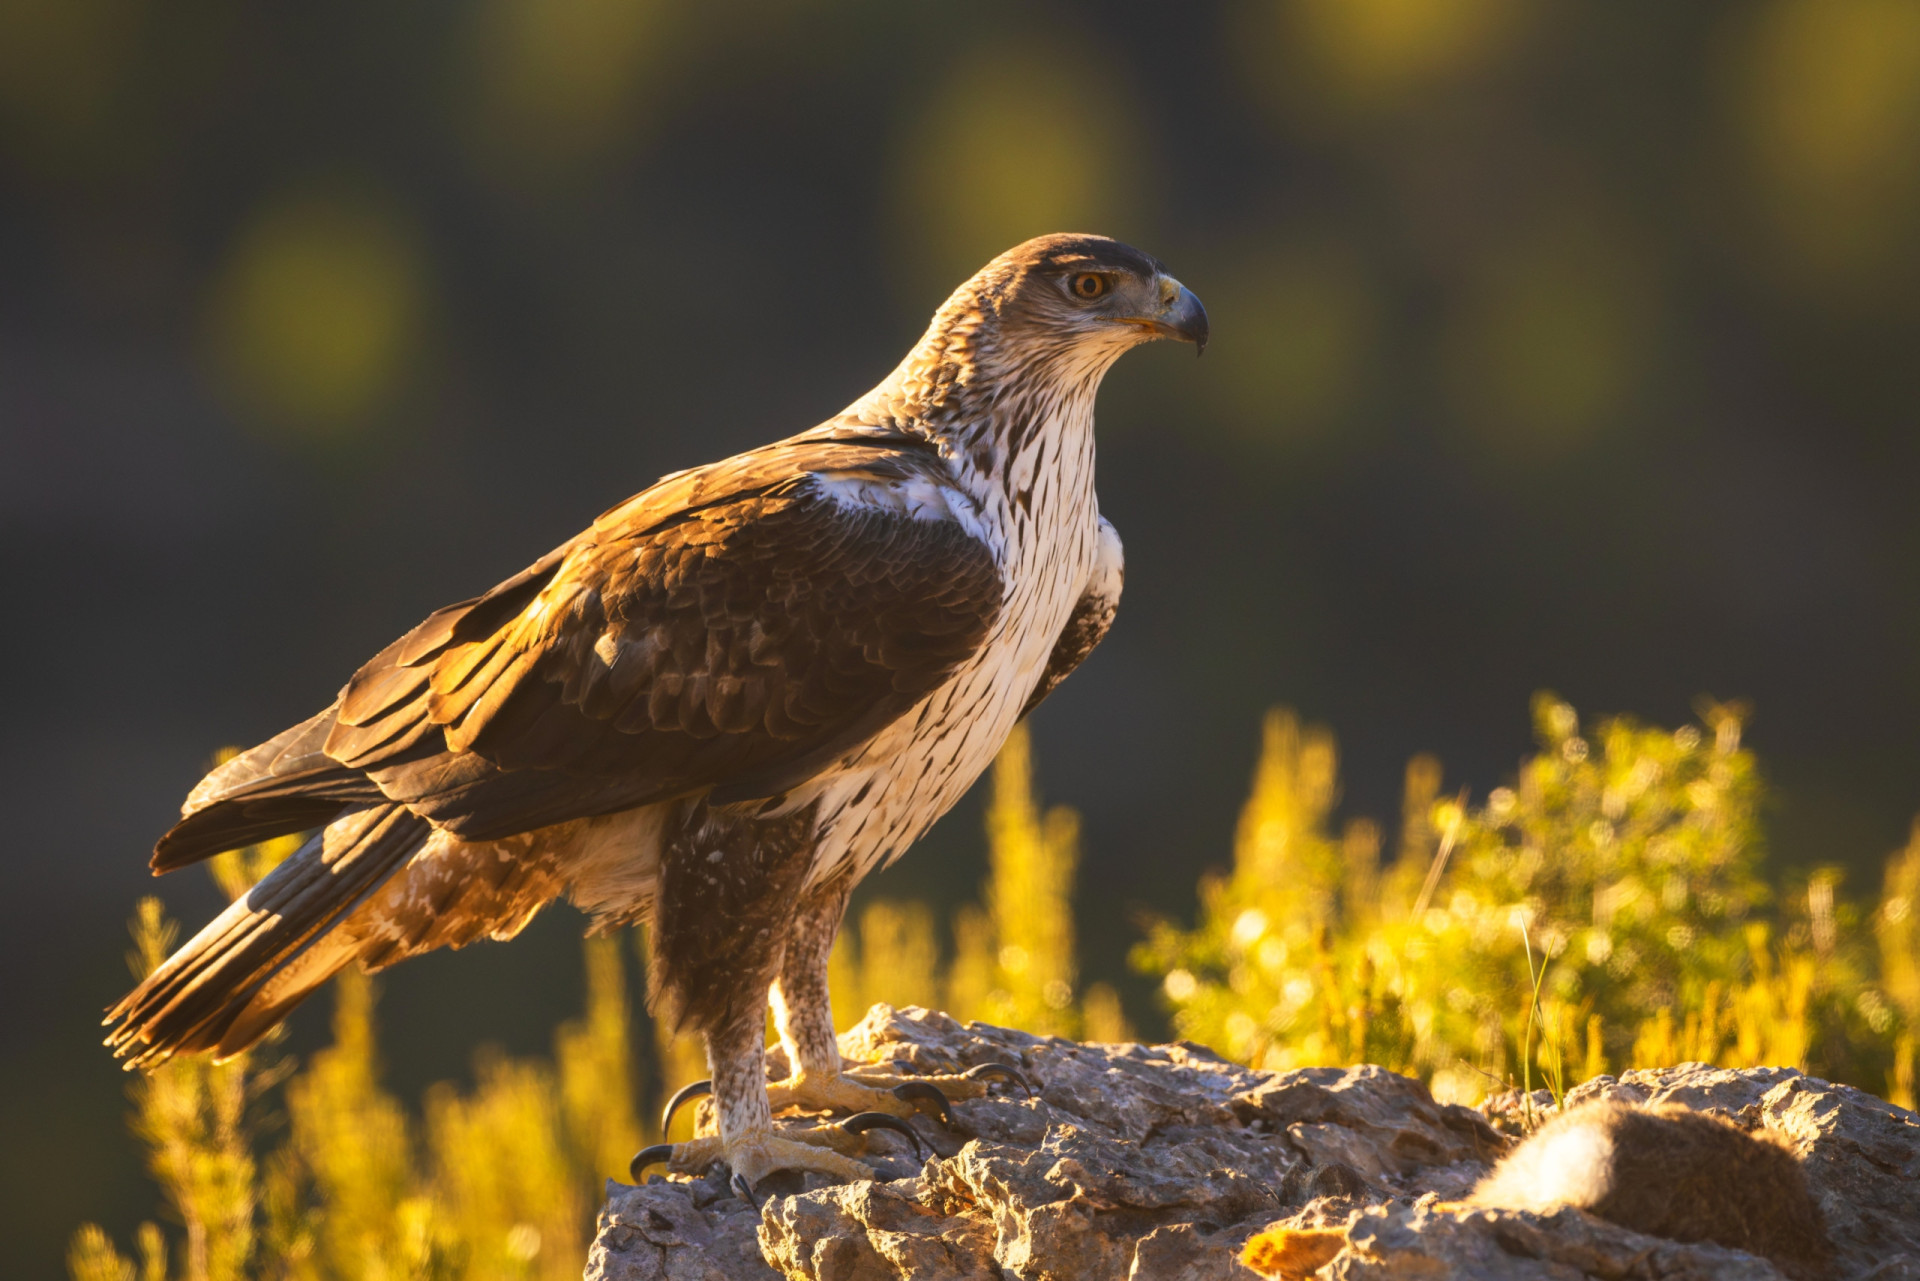 <p>King of the skies, however, is the majestic Bonelli's eagle. This handsome raptor is another bird perfectly adapted to the Spanish badlands.</p><p><a href="https://www.msn.com/en-us/community/channel/vid-7xx8mnucu55yw63we9va2gwr7uihbxwc68fxqp25x6tg4ftibpra?cvid=94631541bc0f4f89bfd59158d696ad7e">Follow us and access great exclusive content every day</a></p>